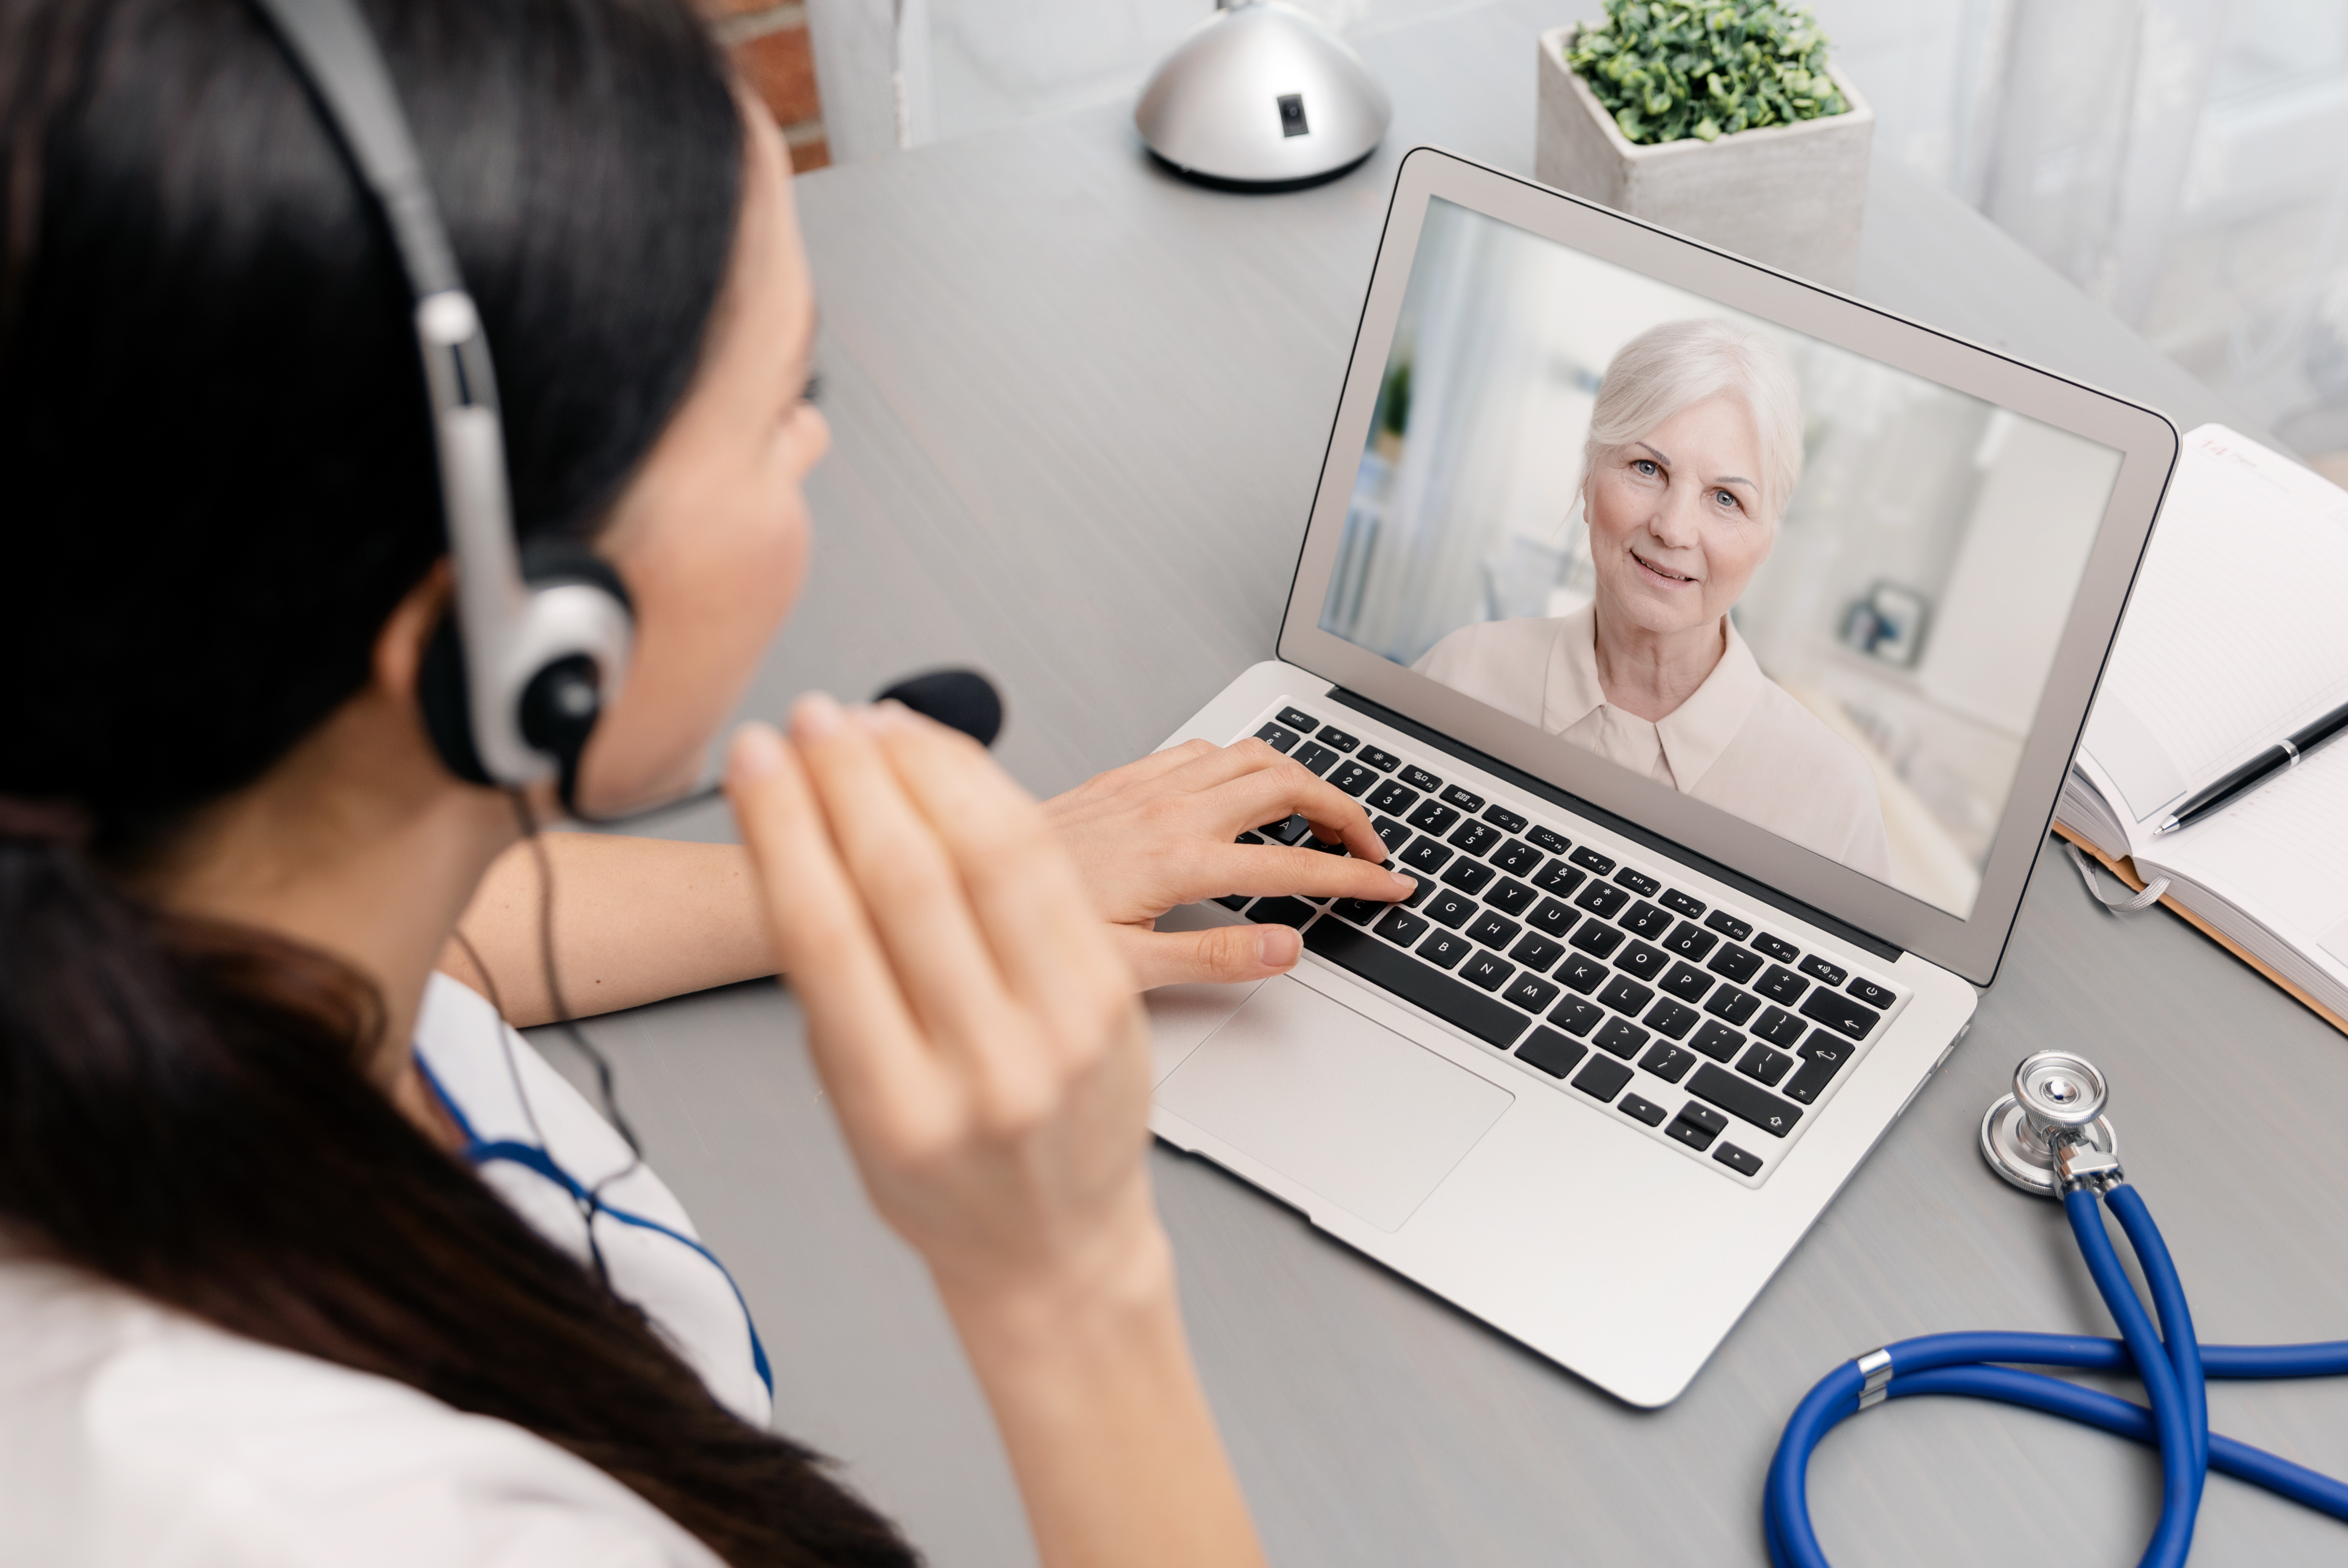 5 Best Practices When Starting a Remote Patient Monitoring Business